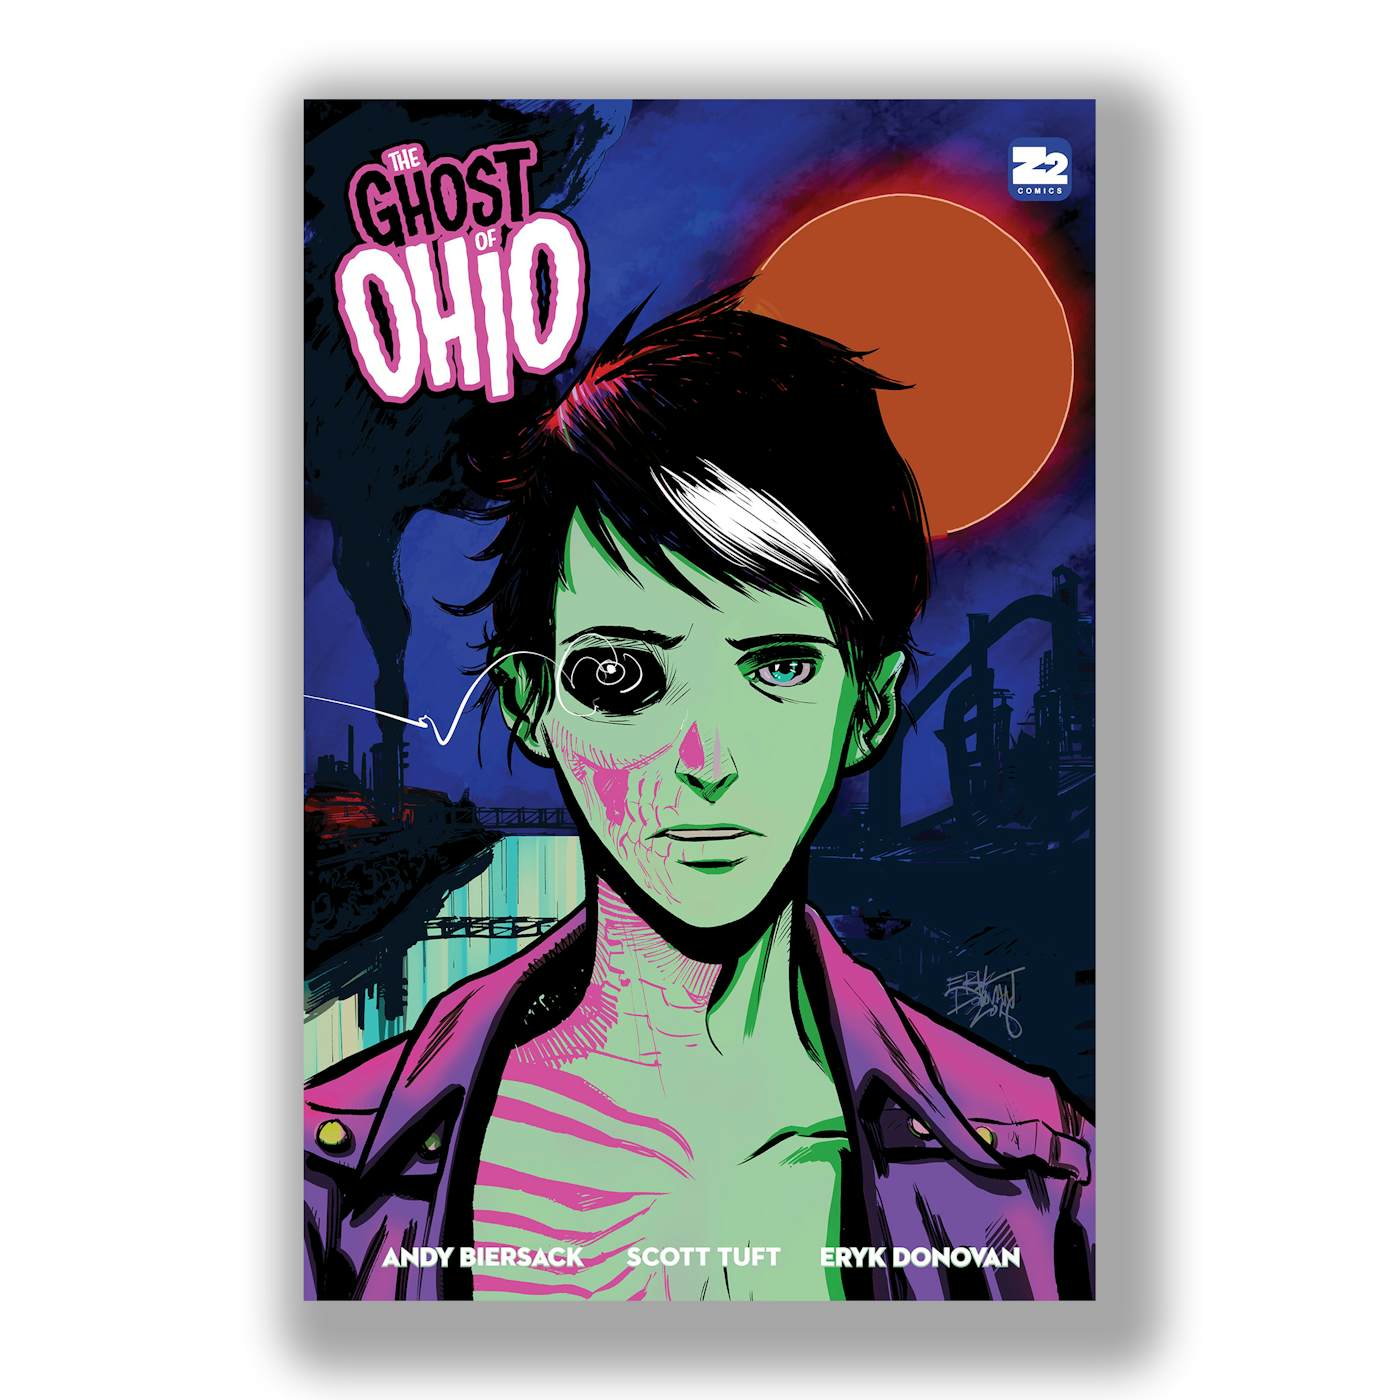 Andy Black Andy Biersack - The Ghost of Ohio Graphic Novel